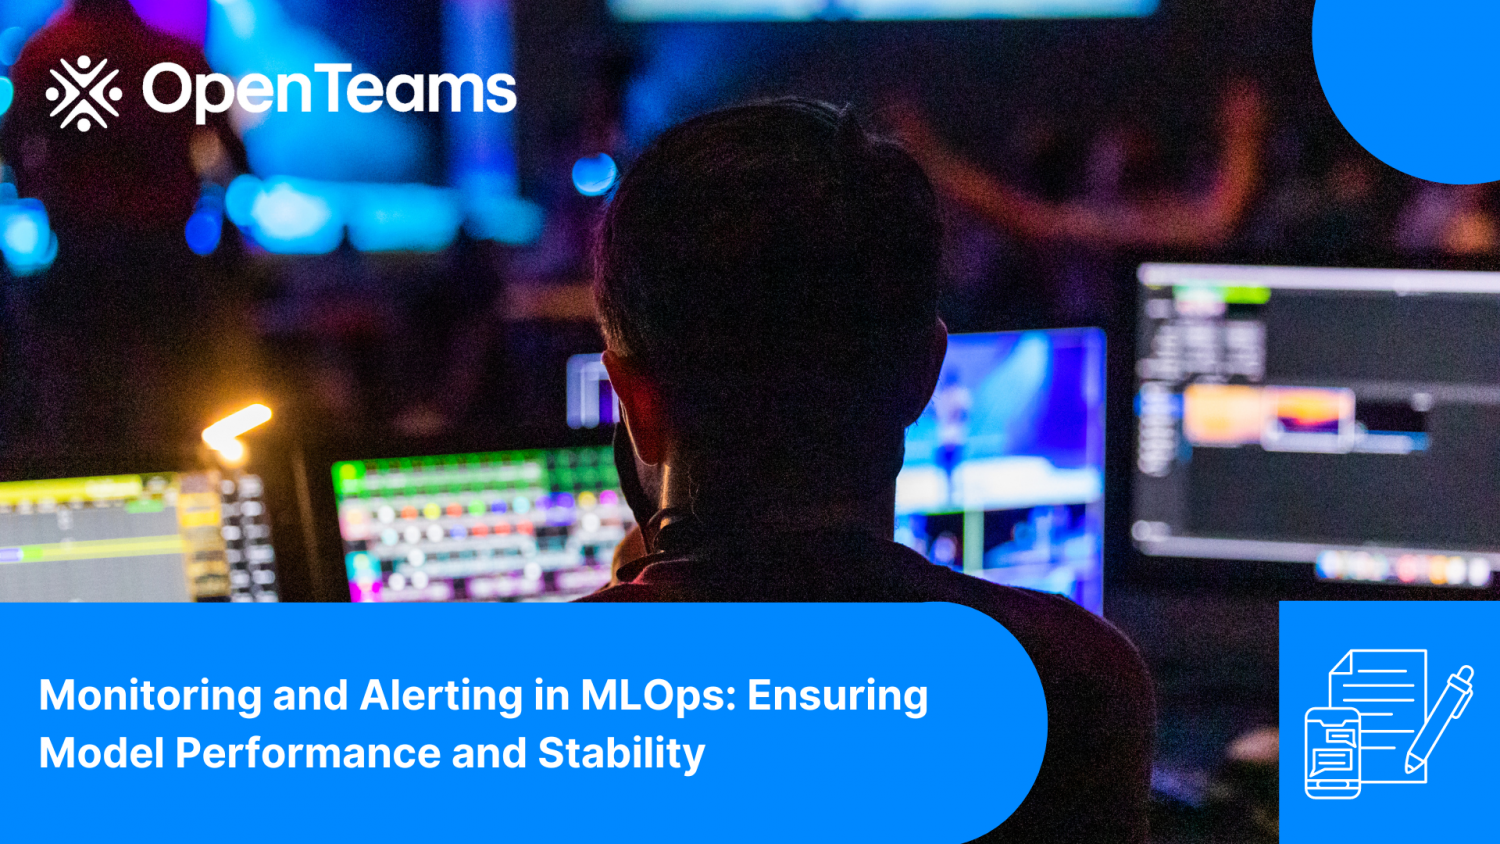 Monitoring and Alerting in MLOps: Ensuring Model Performance and Stability